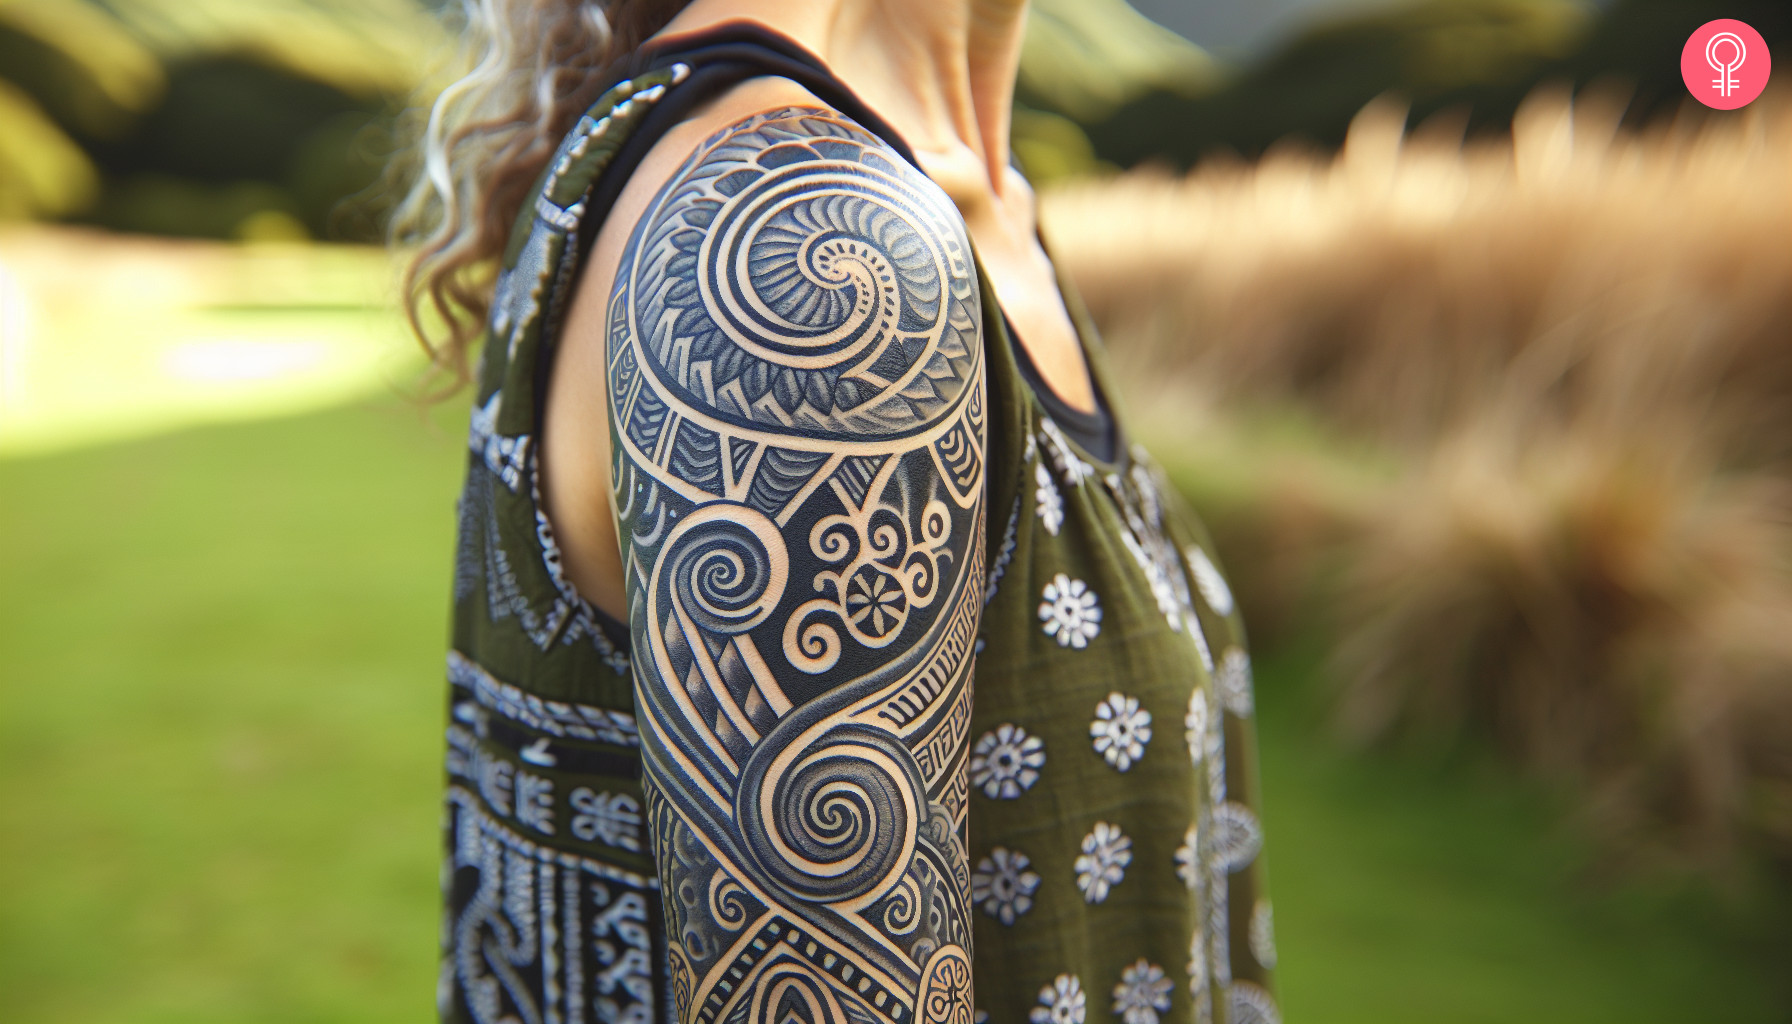 Grey and black maori tattoo on the upper arm of a woman